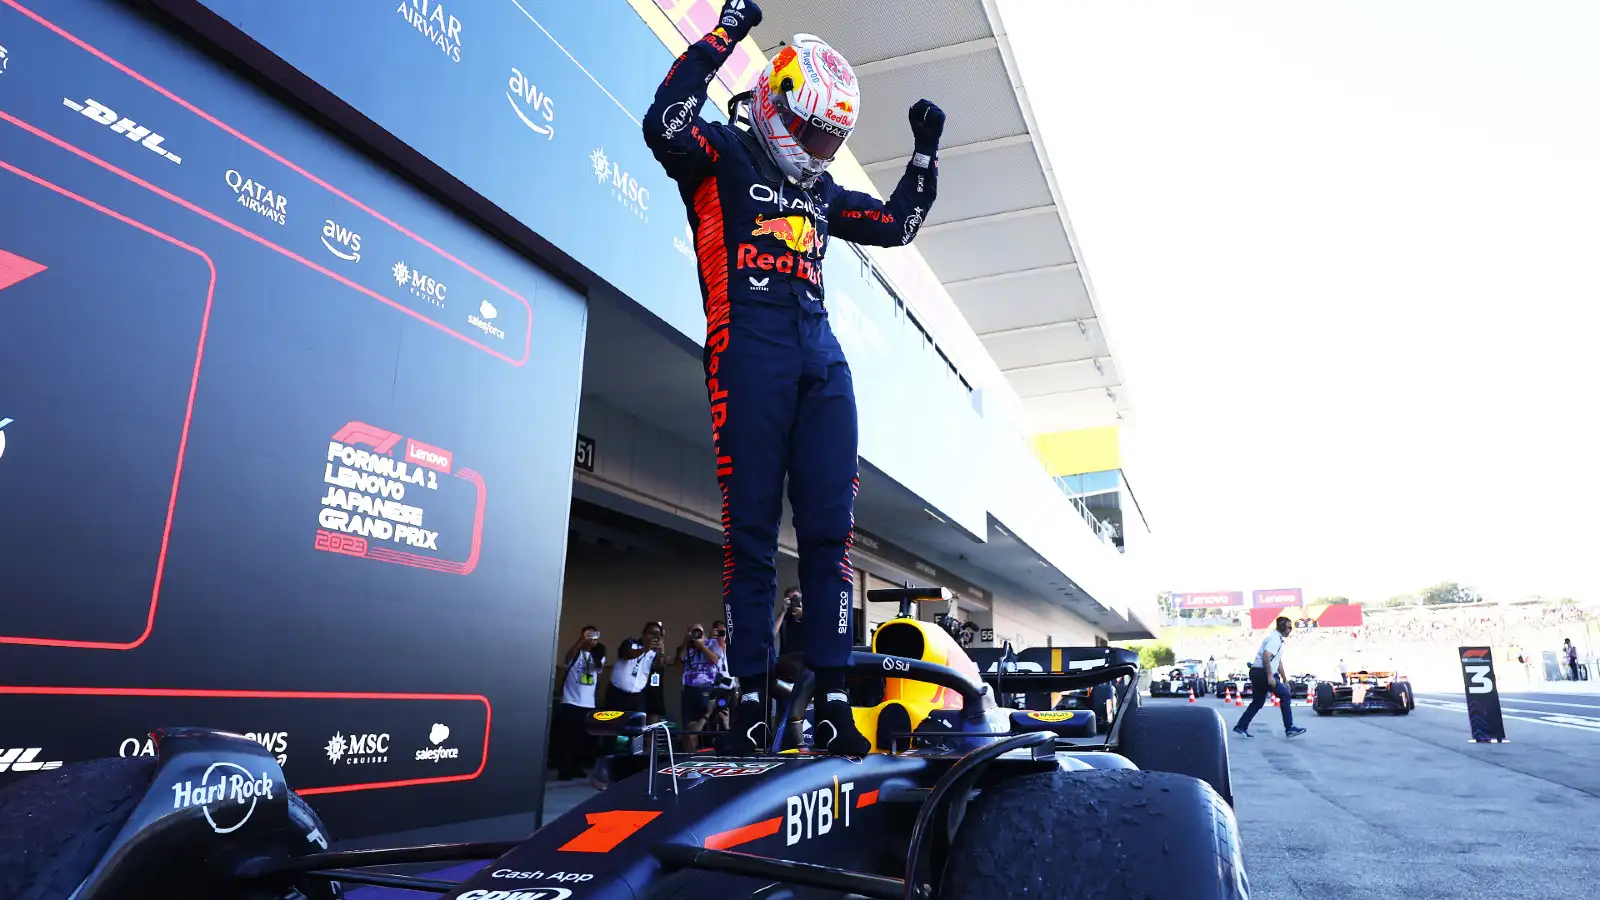 Red Bull's Max Verstappen celebrates victory in the pitlane at Suzuka at the Japanese Grand Prix.